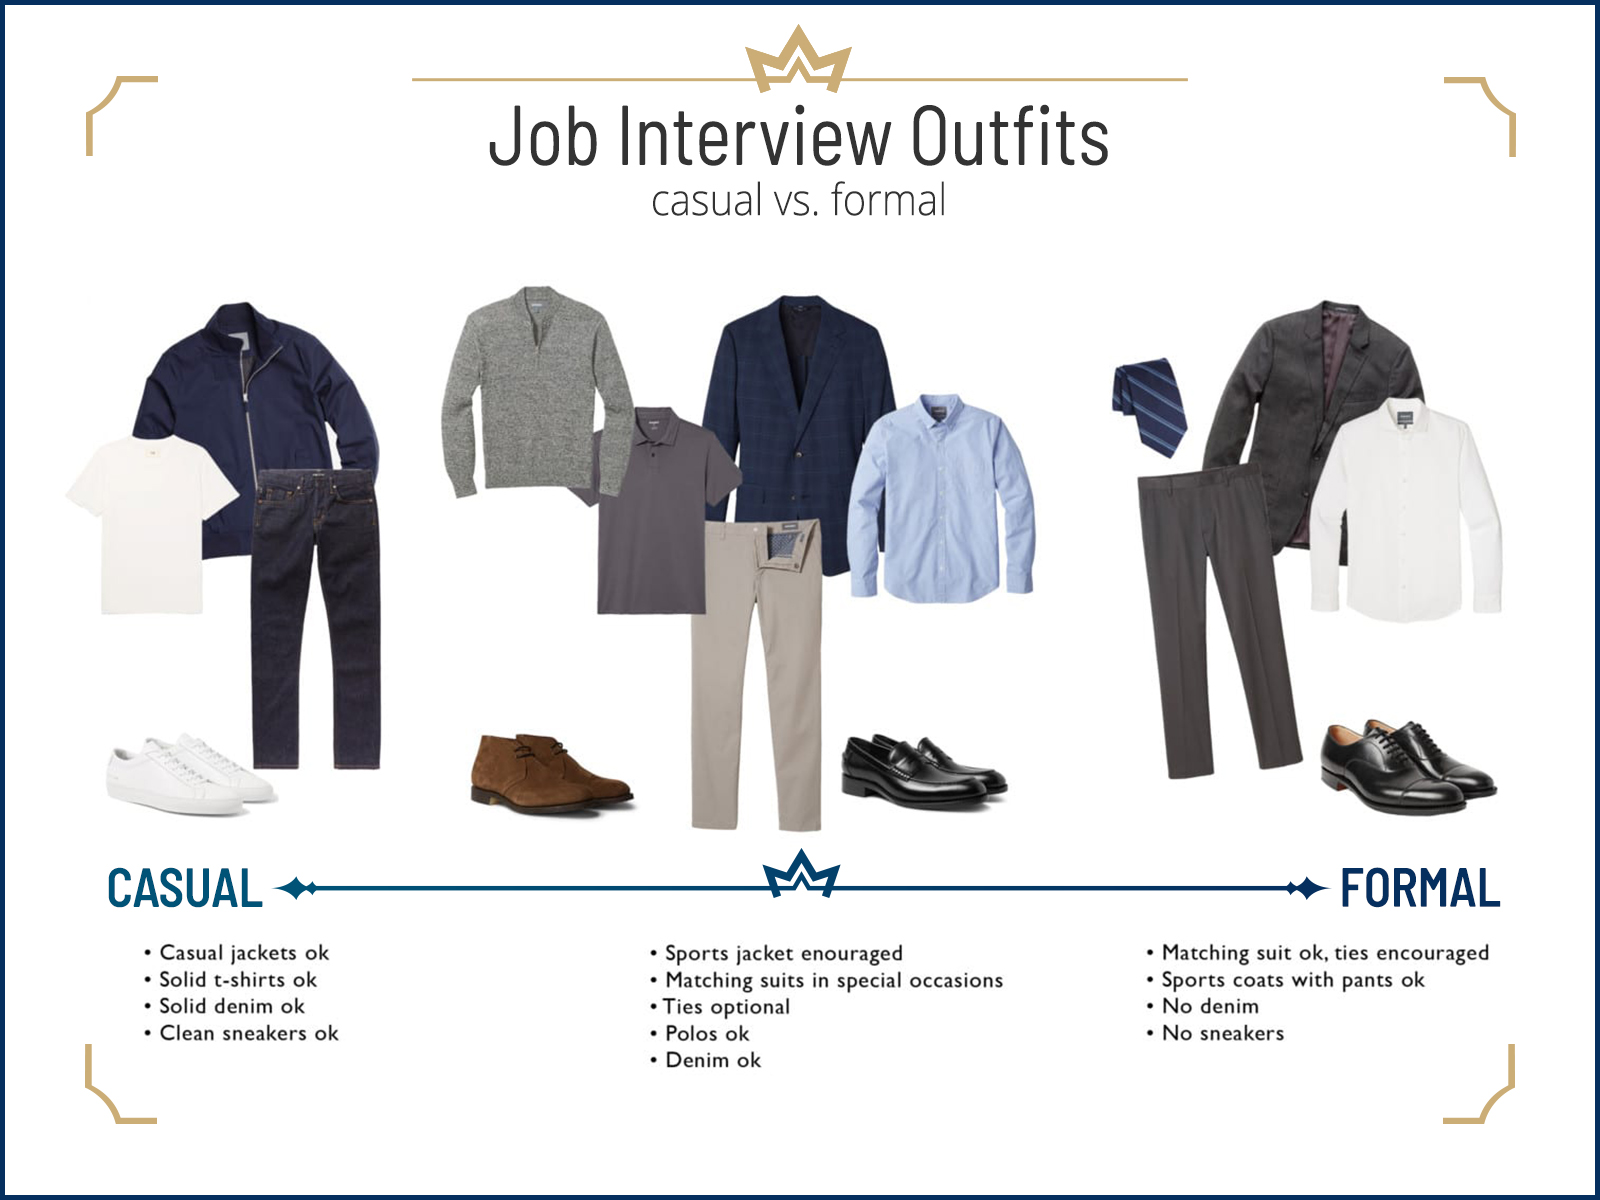 Casual vs. formal job interview outfits